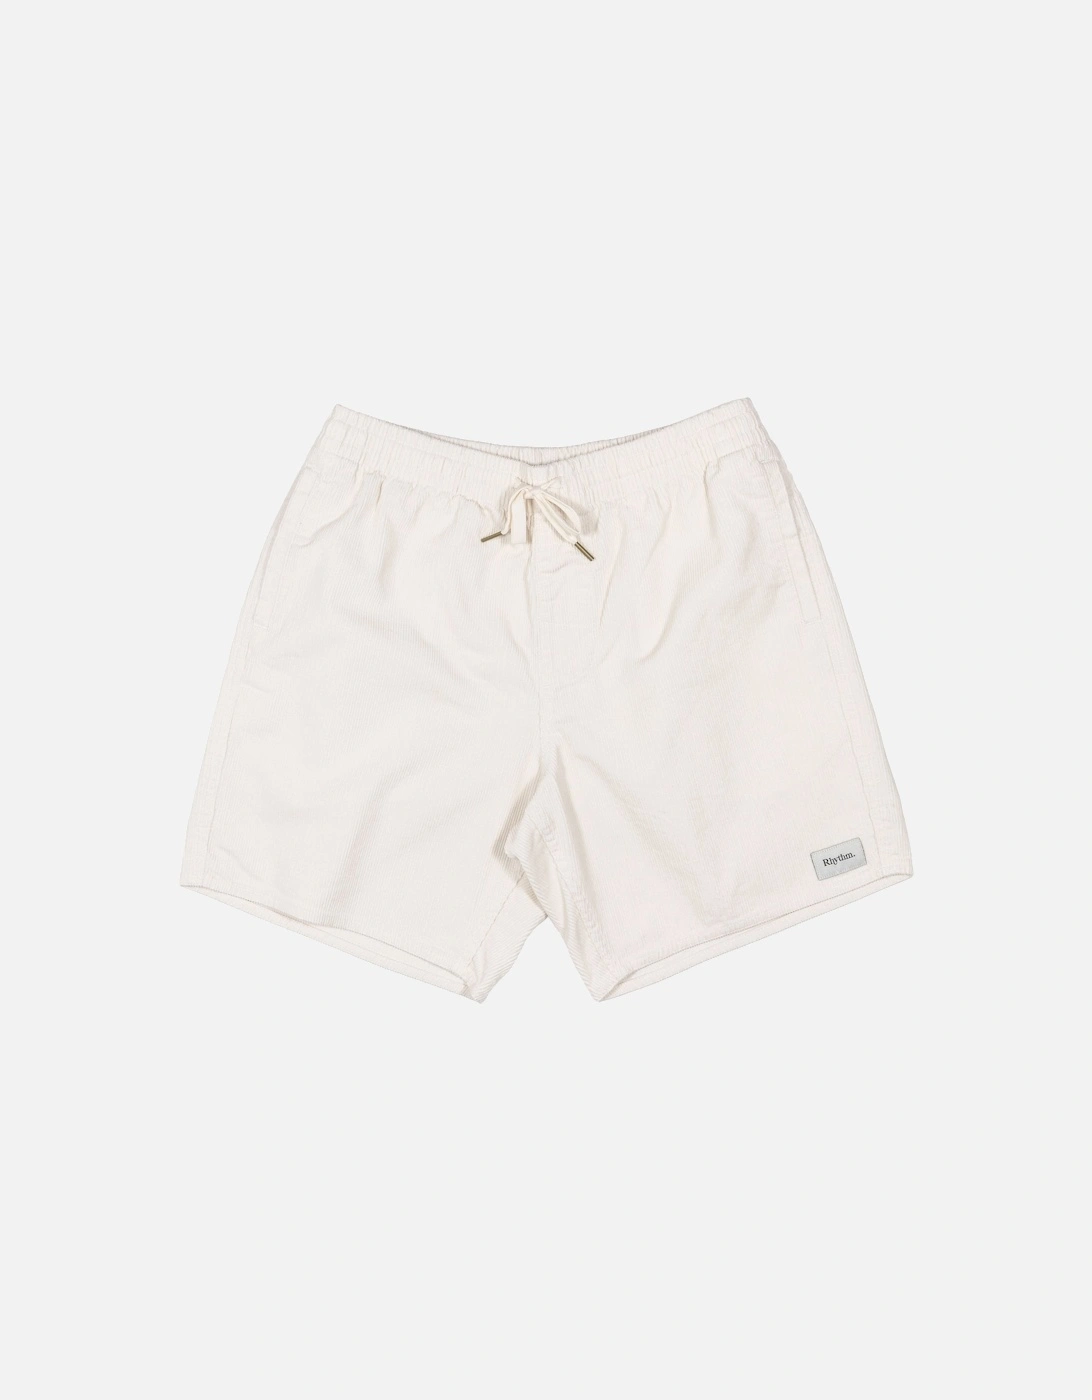 Classic Cord Jam Shorts - Vintage White, 6 of 5